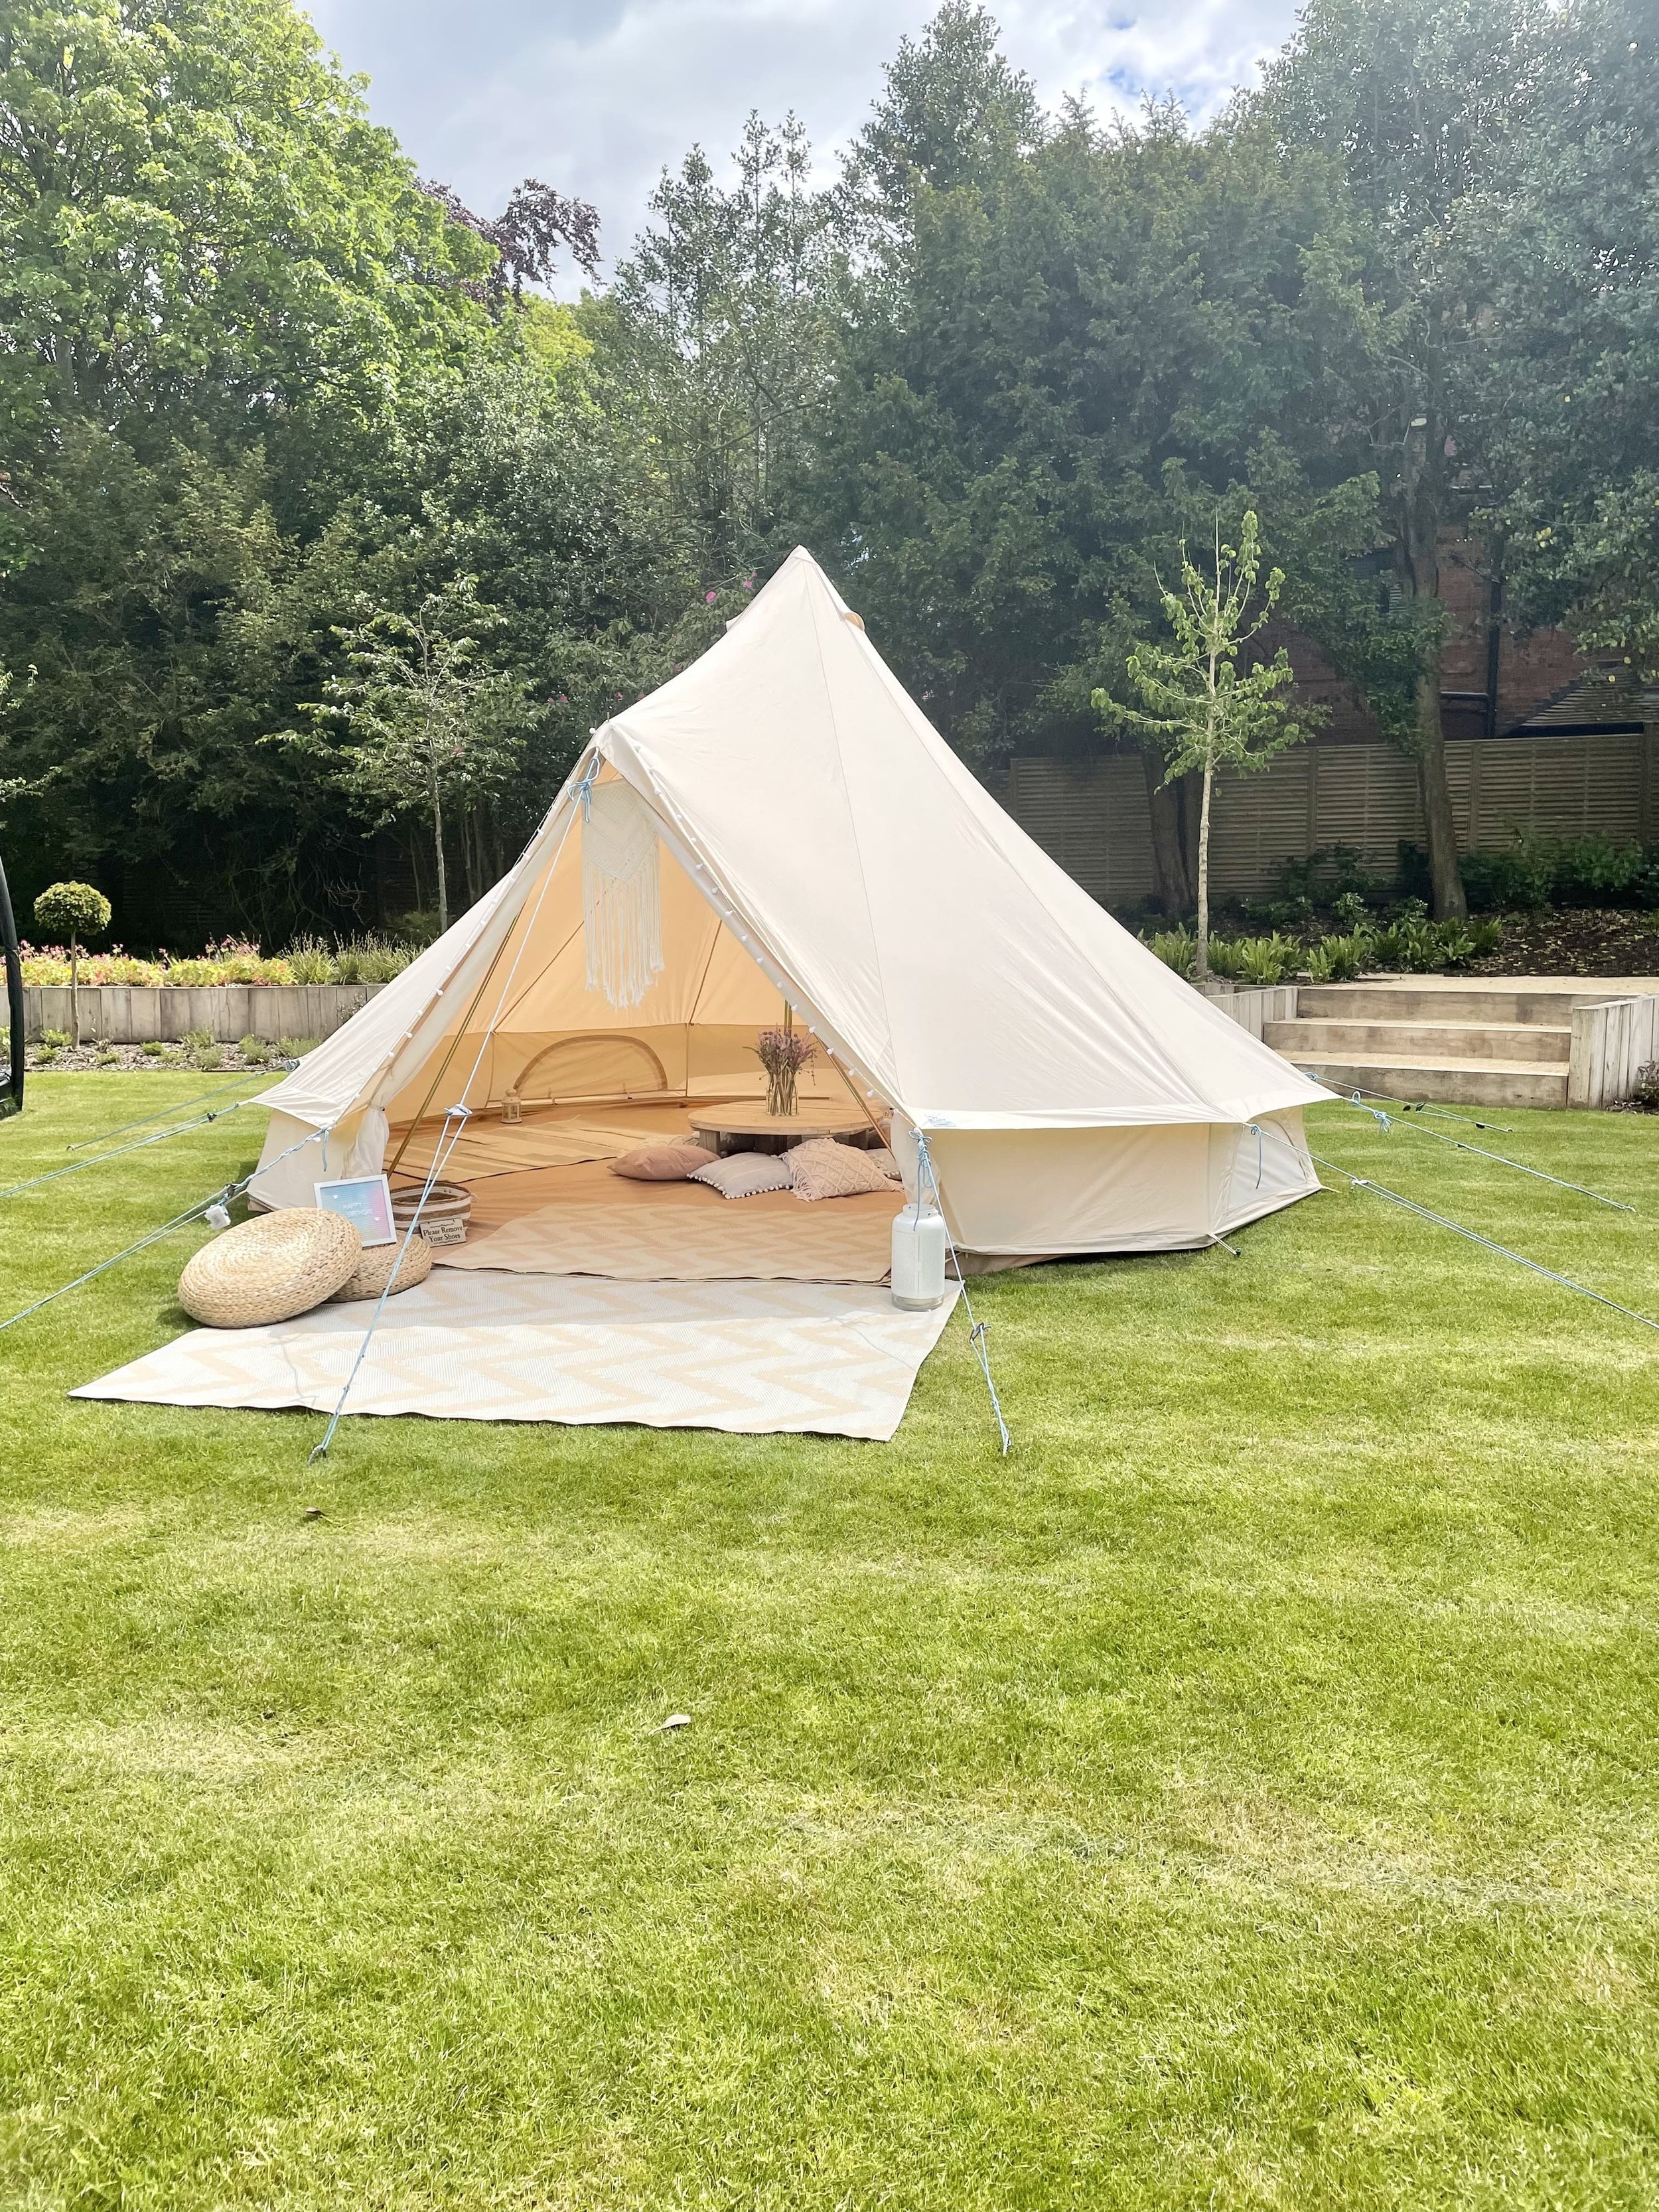 Sleepunder Yorkshire- Sleepover Party Tents in Greater Manchester